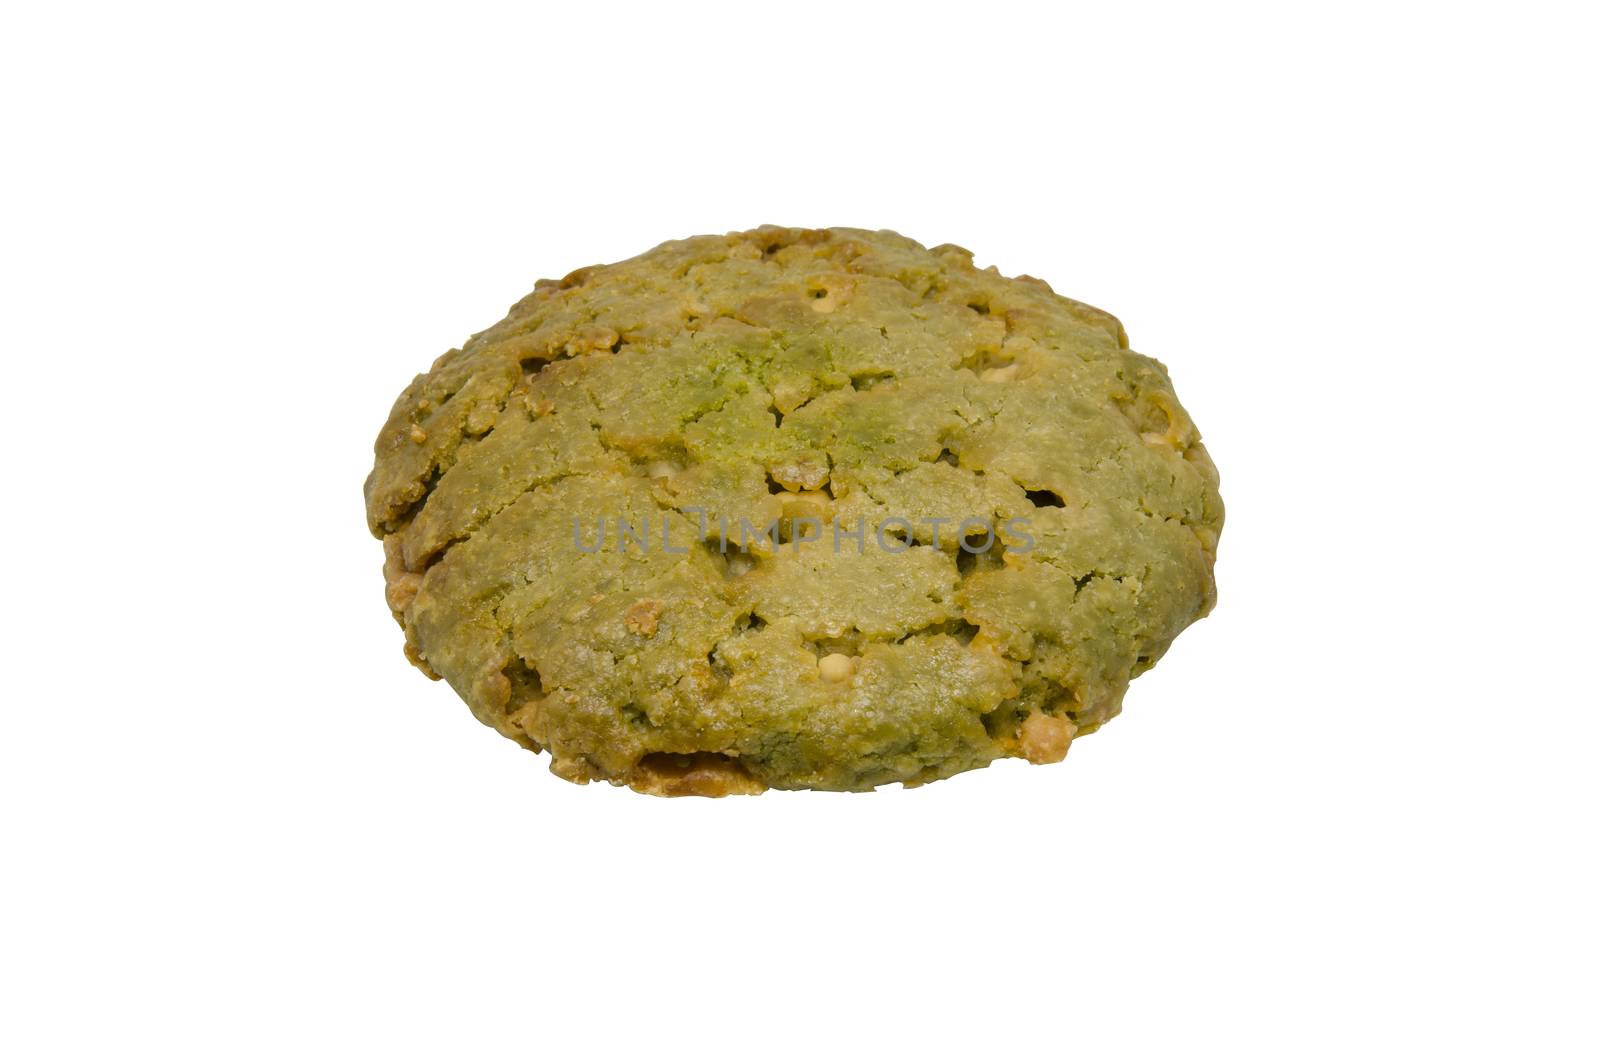 Oatmeal cookies on white background clipping path by phochi